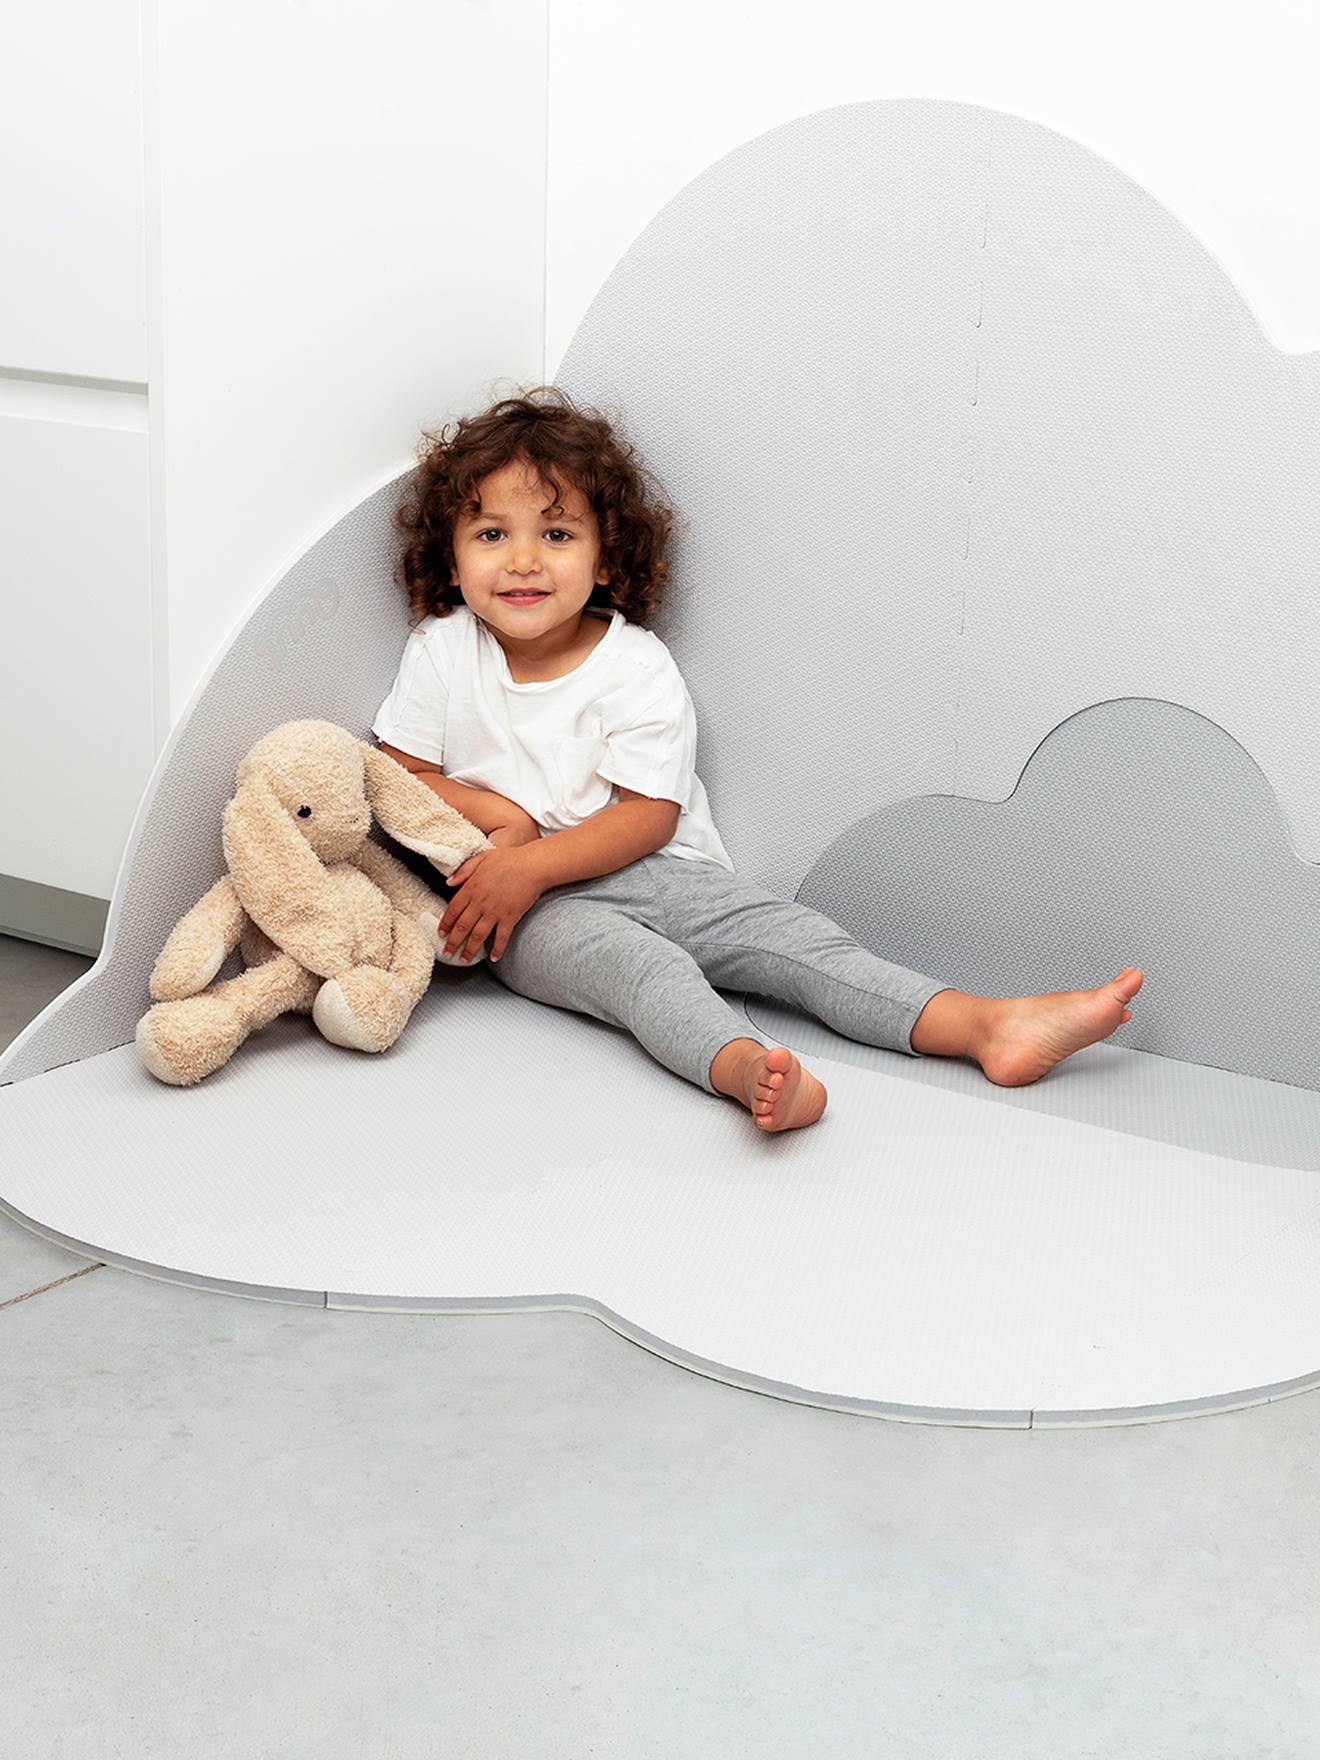 Large Cloud Play Mat, by QUUT grey light solid with design